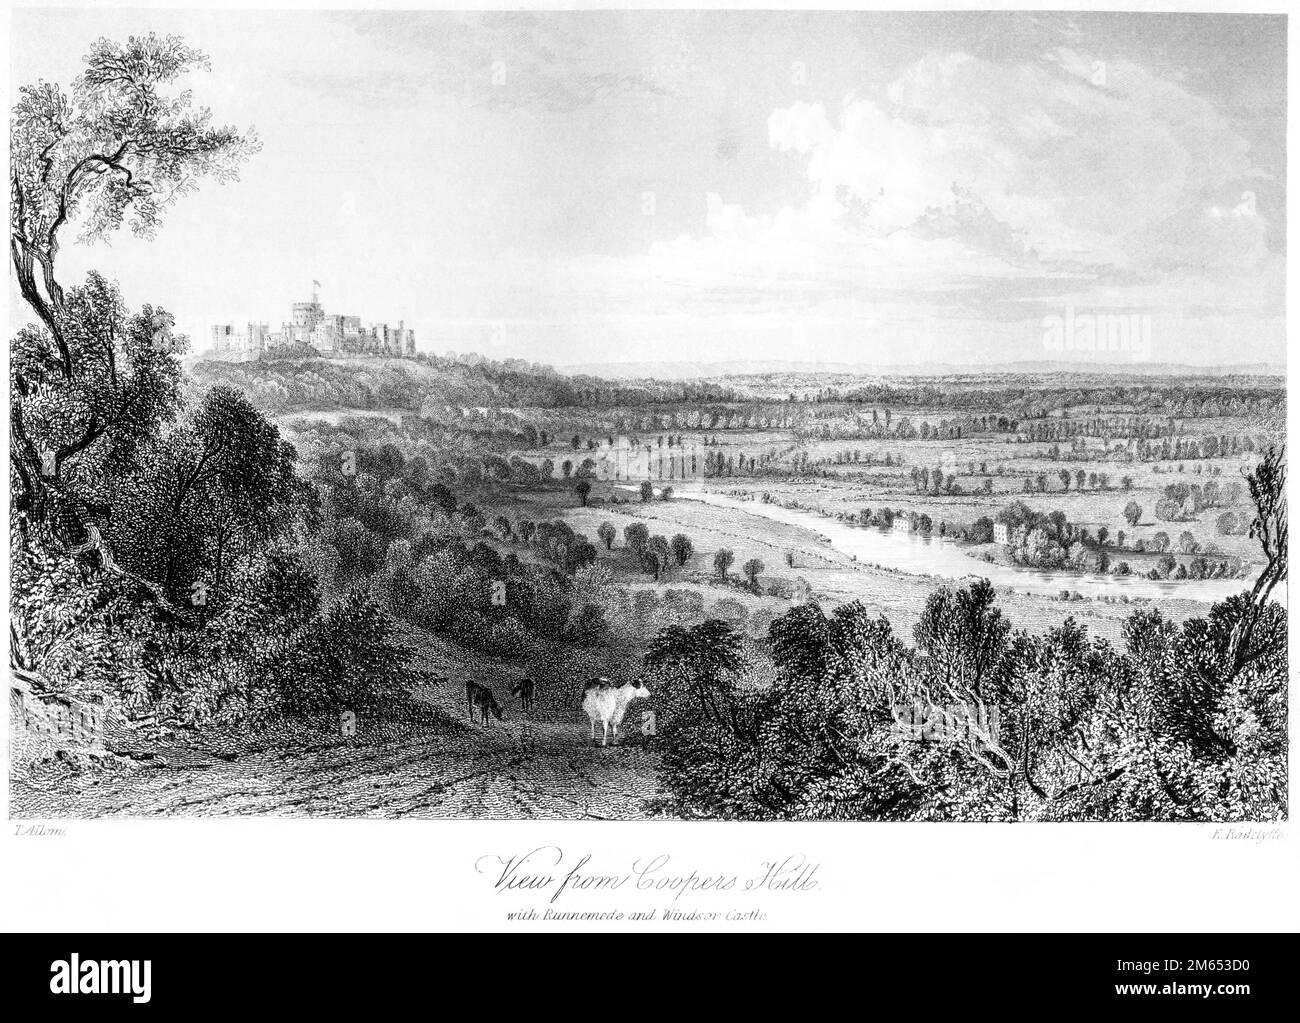 An engraving of a View from Coopers Hill., Surrey with Runnemede and Windsor Castle scanned at high resolution from a book printed in 1850. Stock Photo